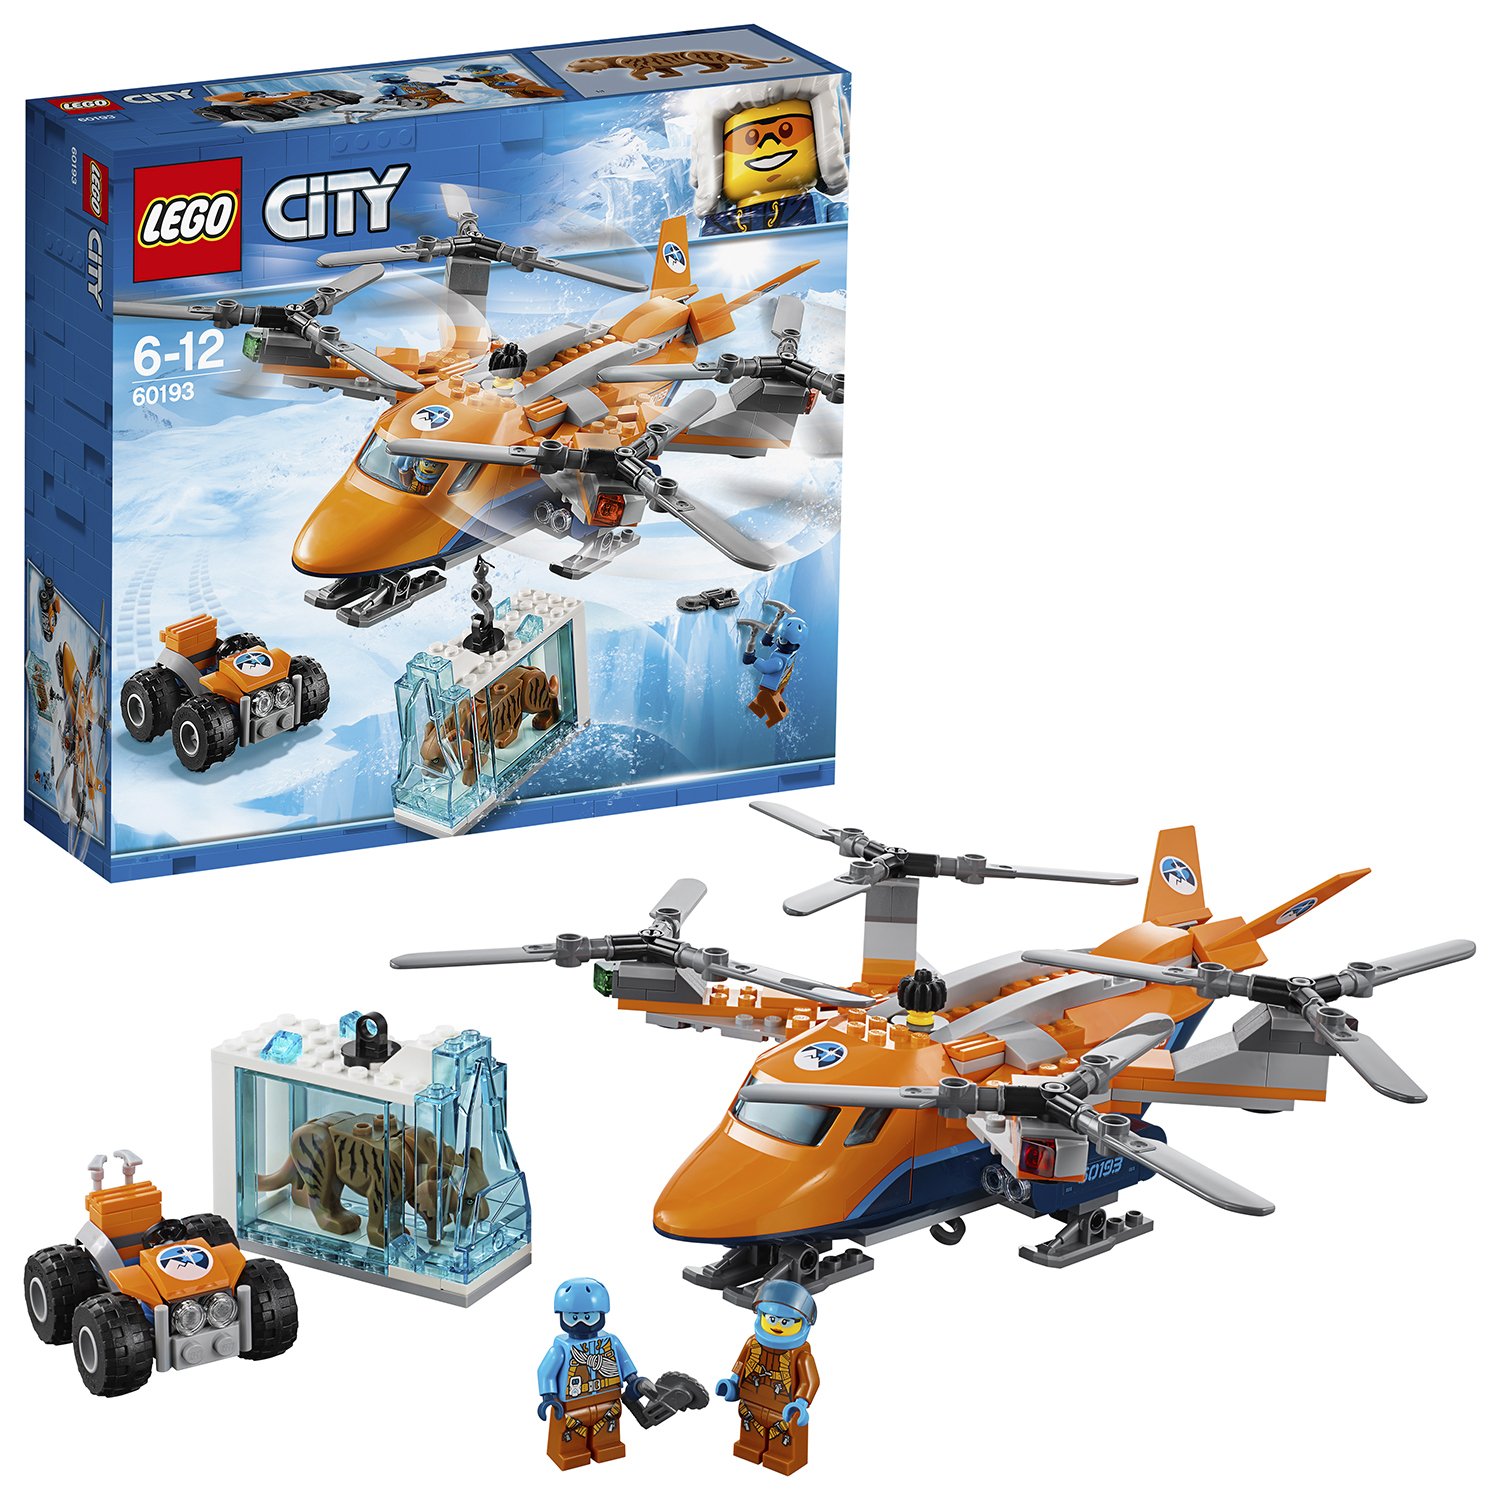 LEGO City Arctic Air Transport Helicopter Toy